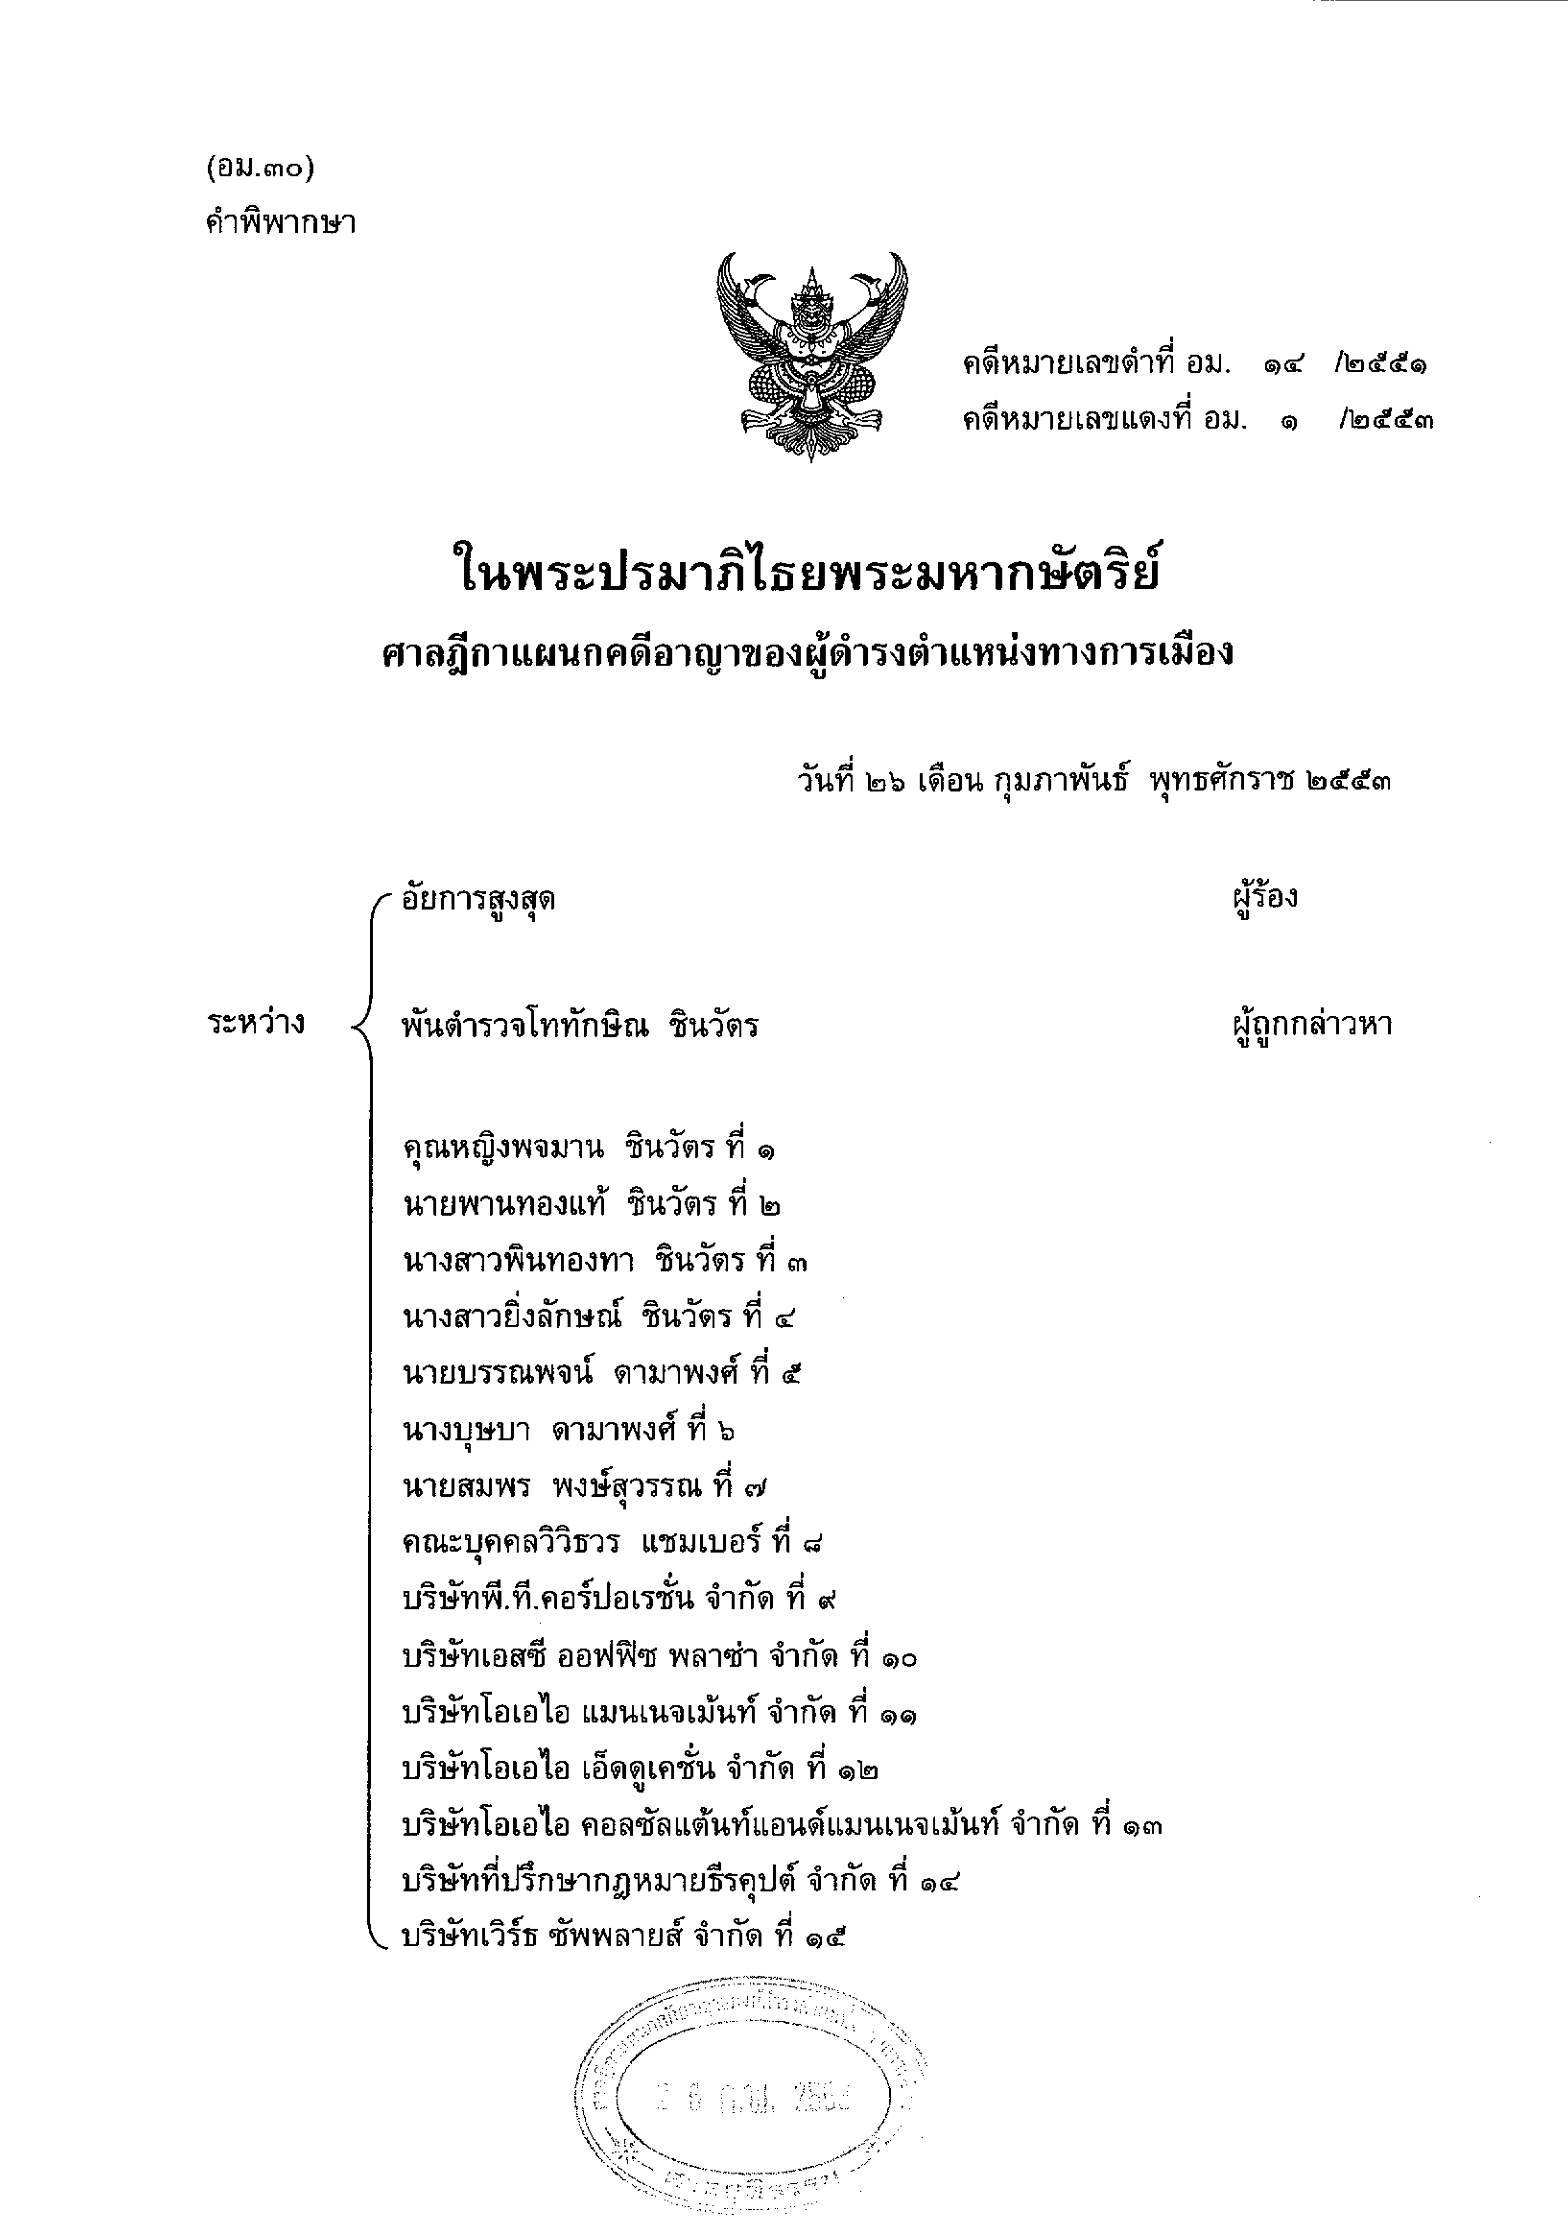 Judgment-of-the-Supreme-Court-of-Thailand-26022010-firstpage